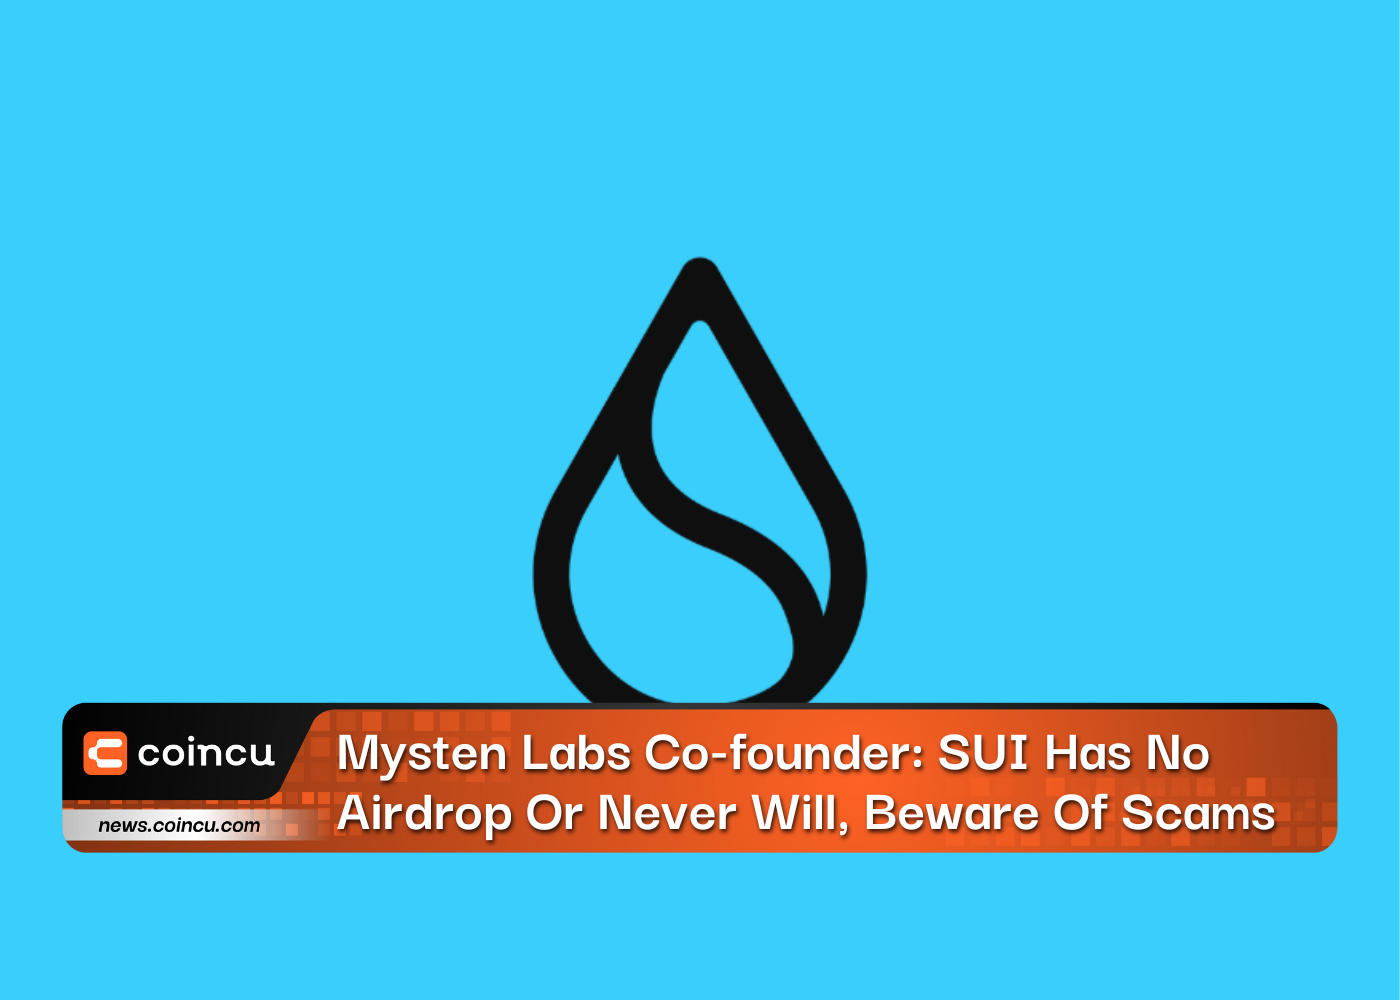 Mysten Labs Co-founder: SUI Has No Airdrop Or Never Will, Beware Of Scams